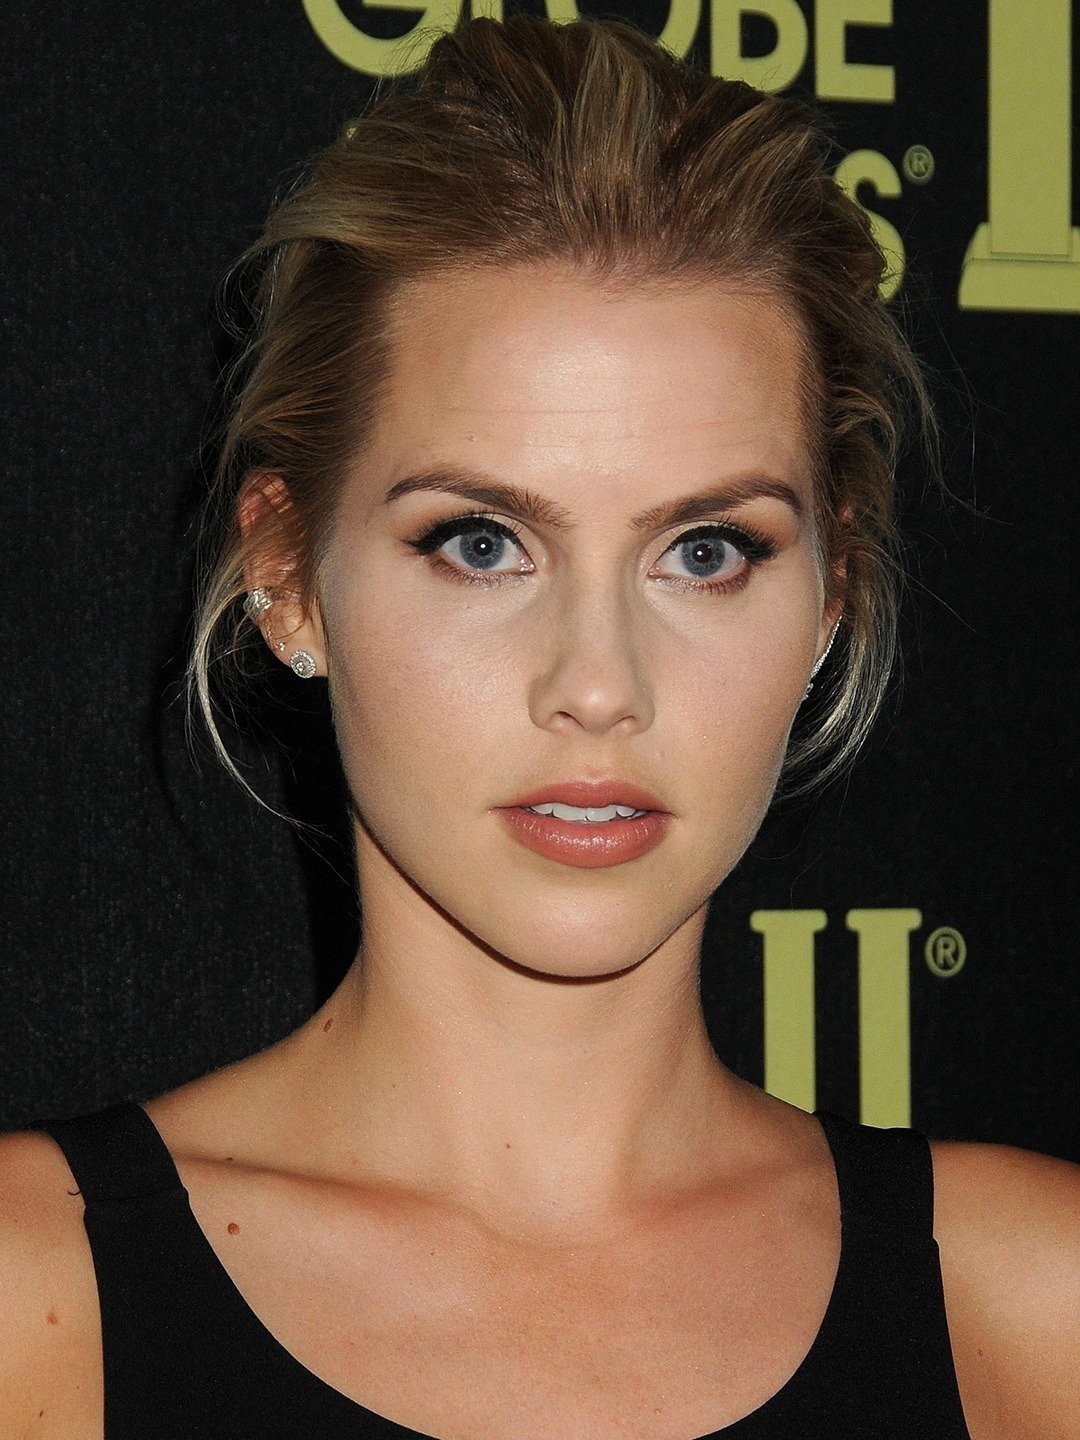 The series and films of Claire Holt